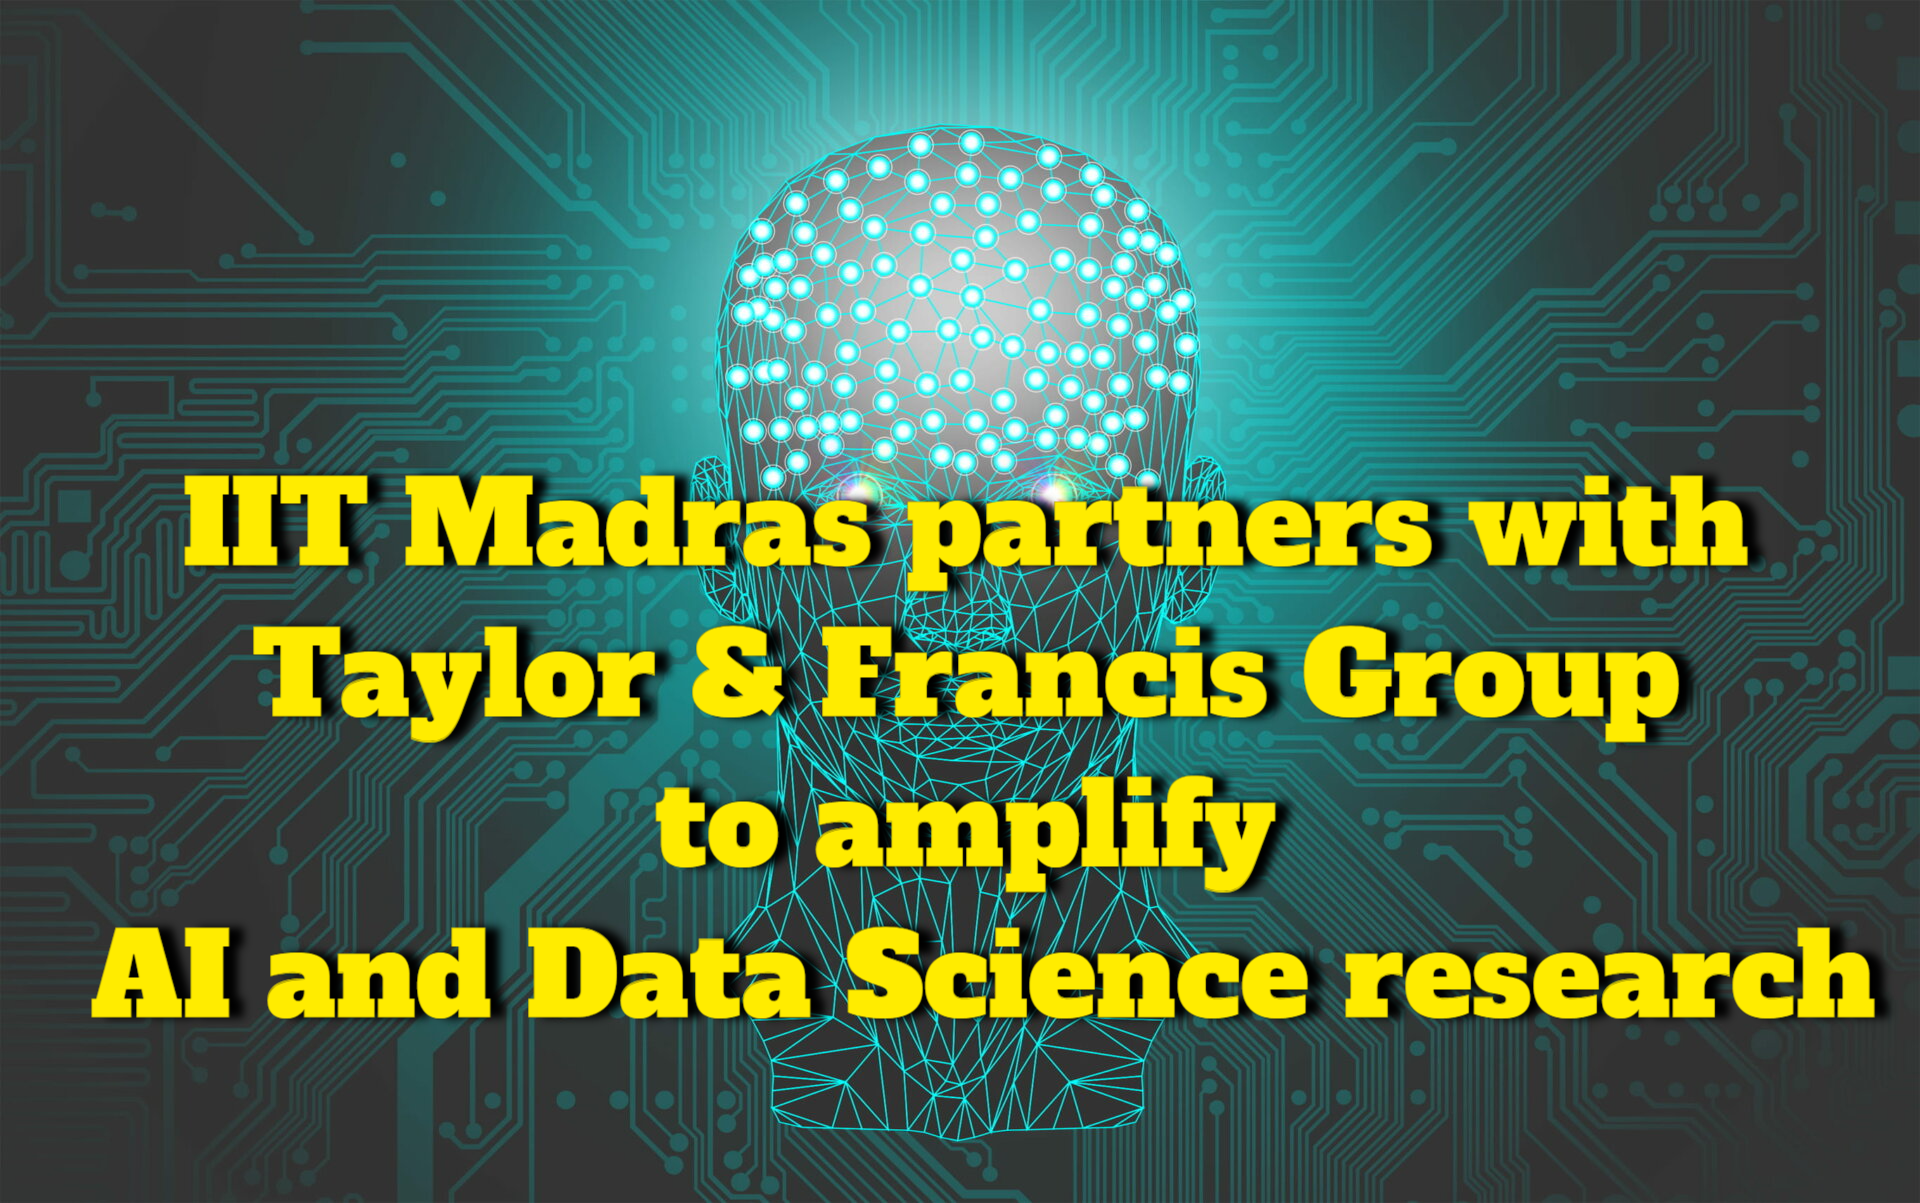 In partnership with Taylor & Francis Group, IIT Madras is amplifying its research in Data Science and AI